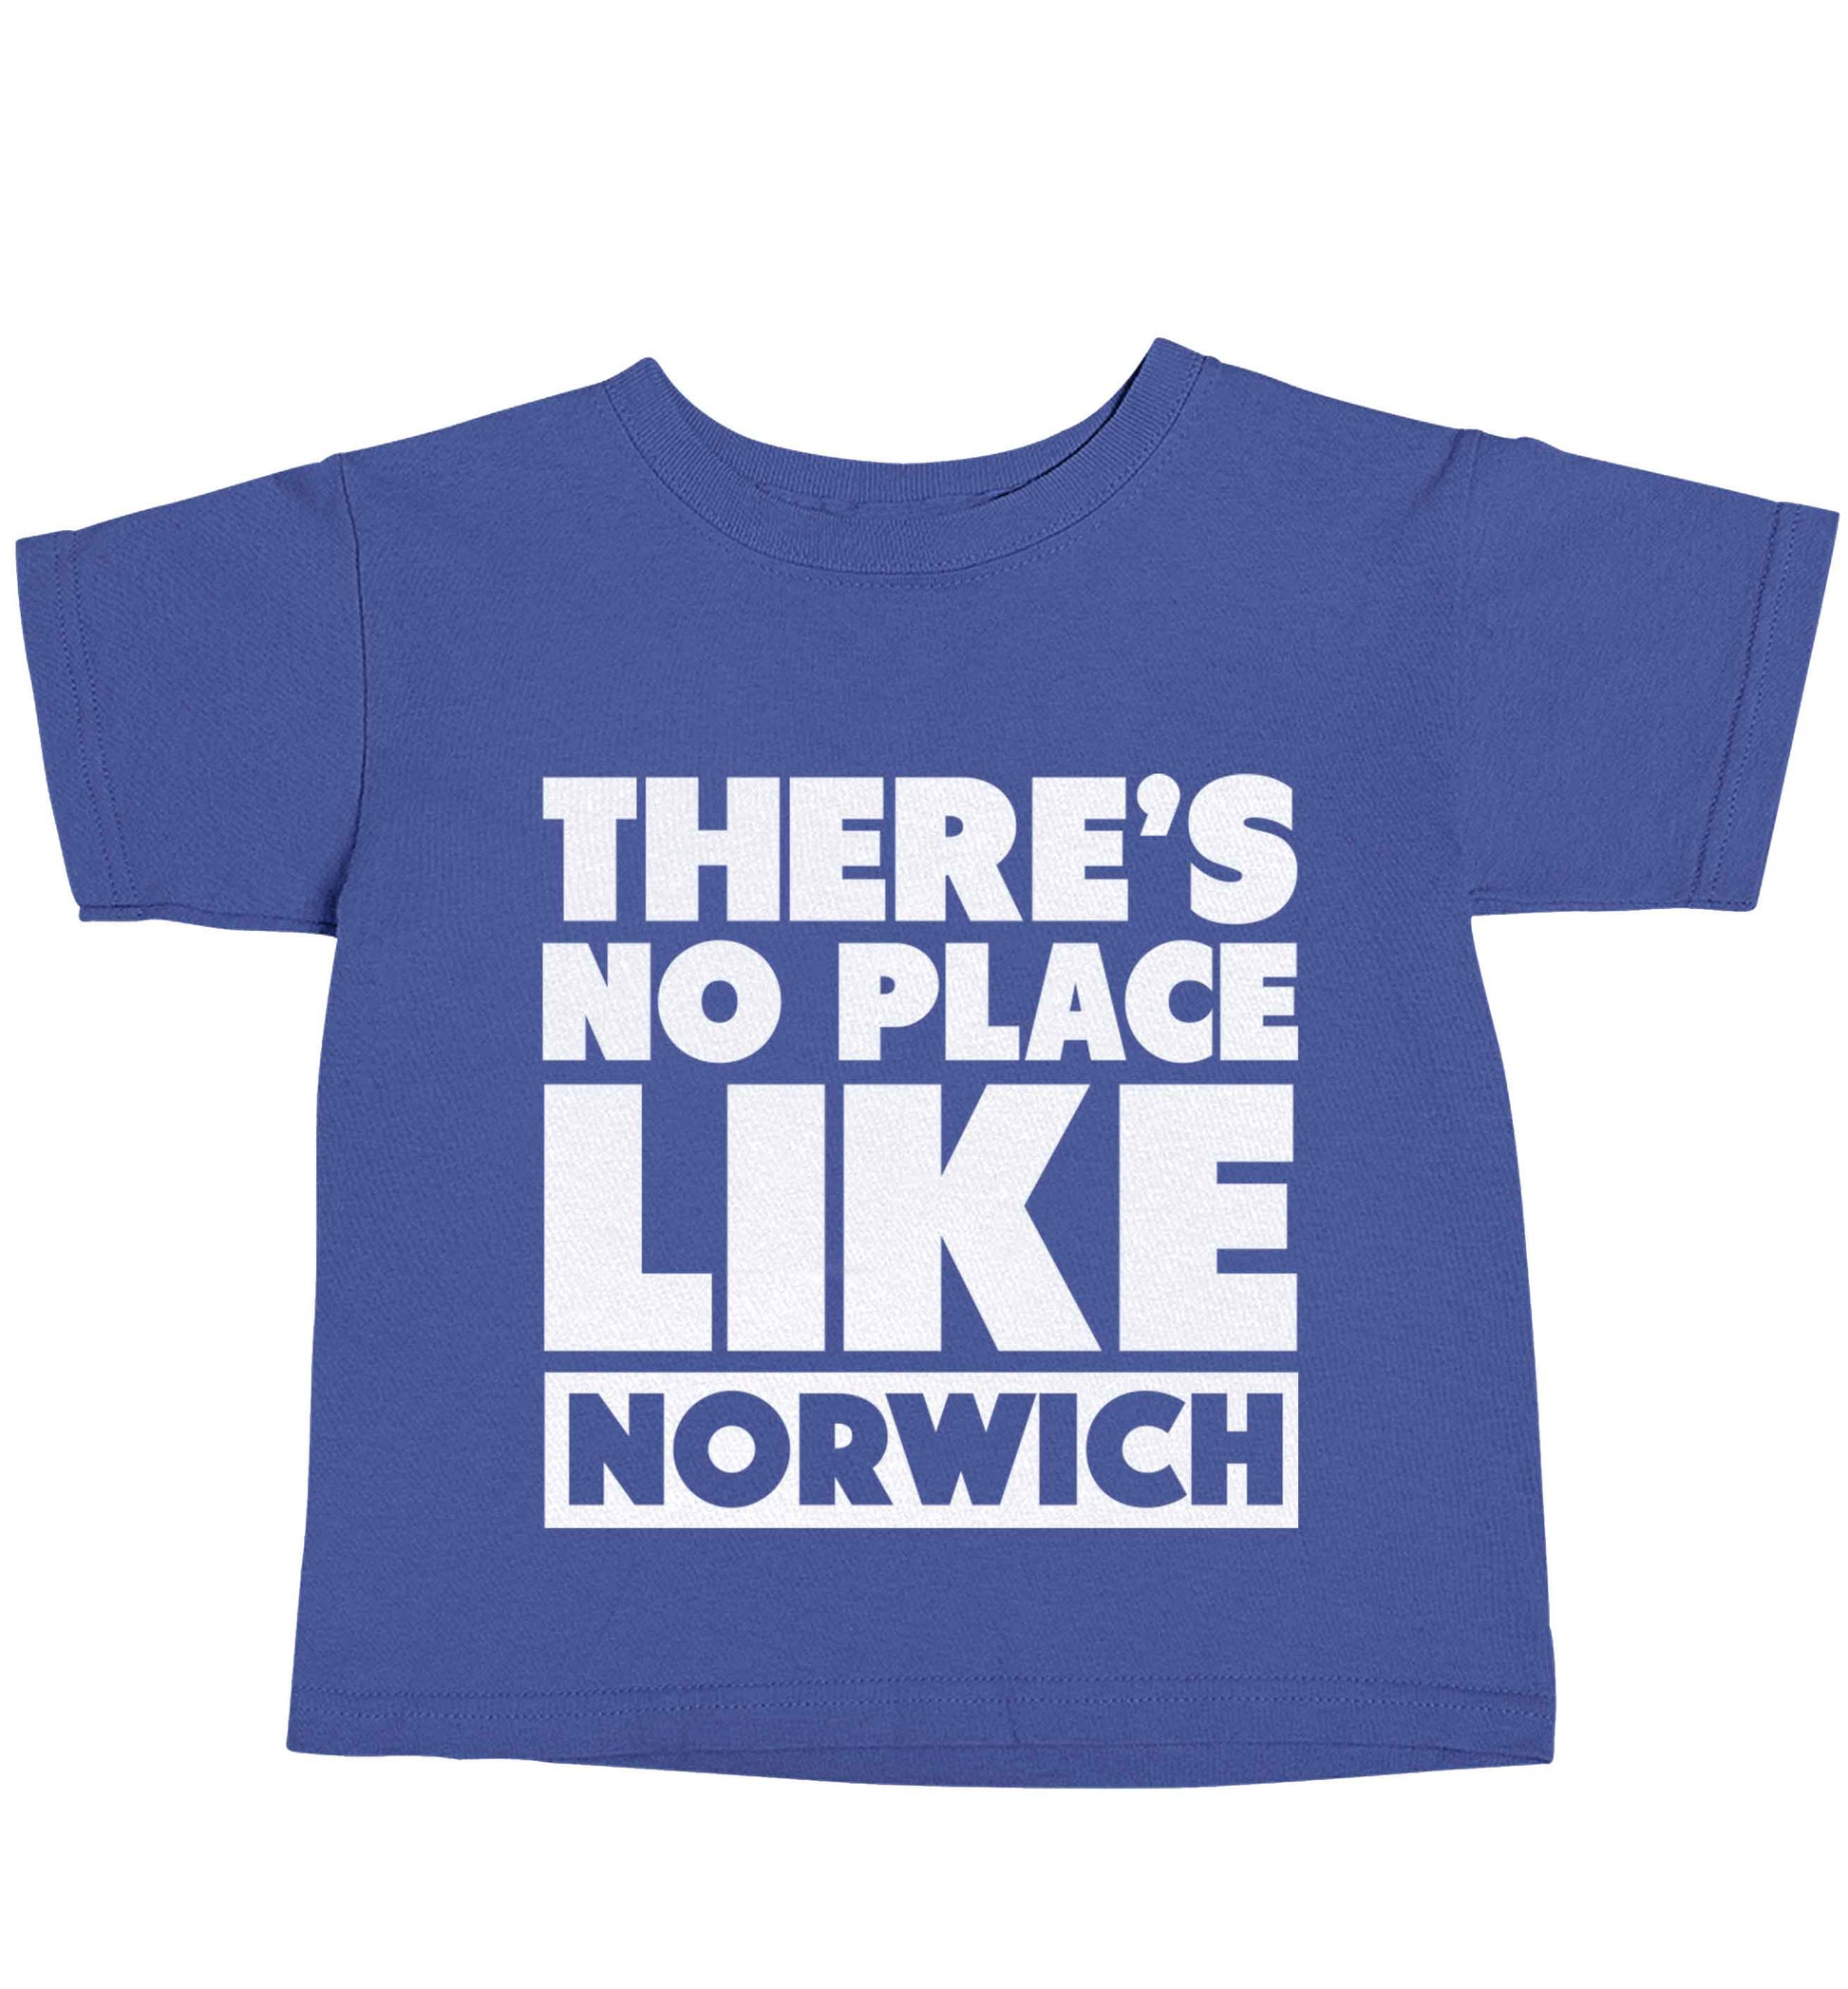 There's no place like Norwich blue baby toddler Tshirt 2 Years